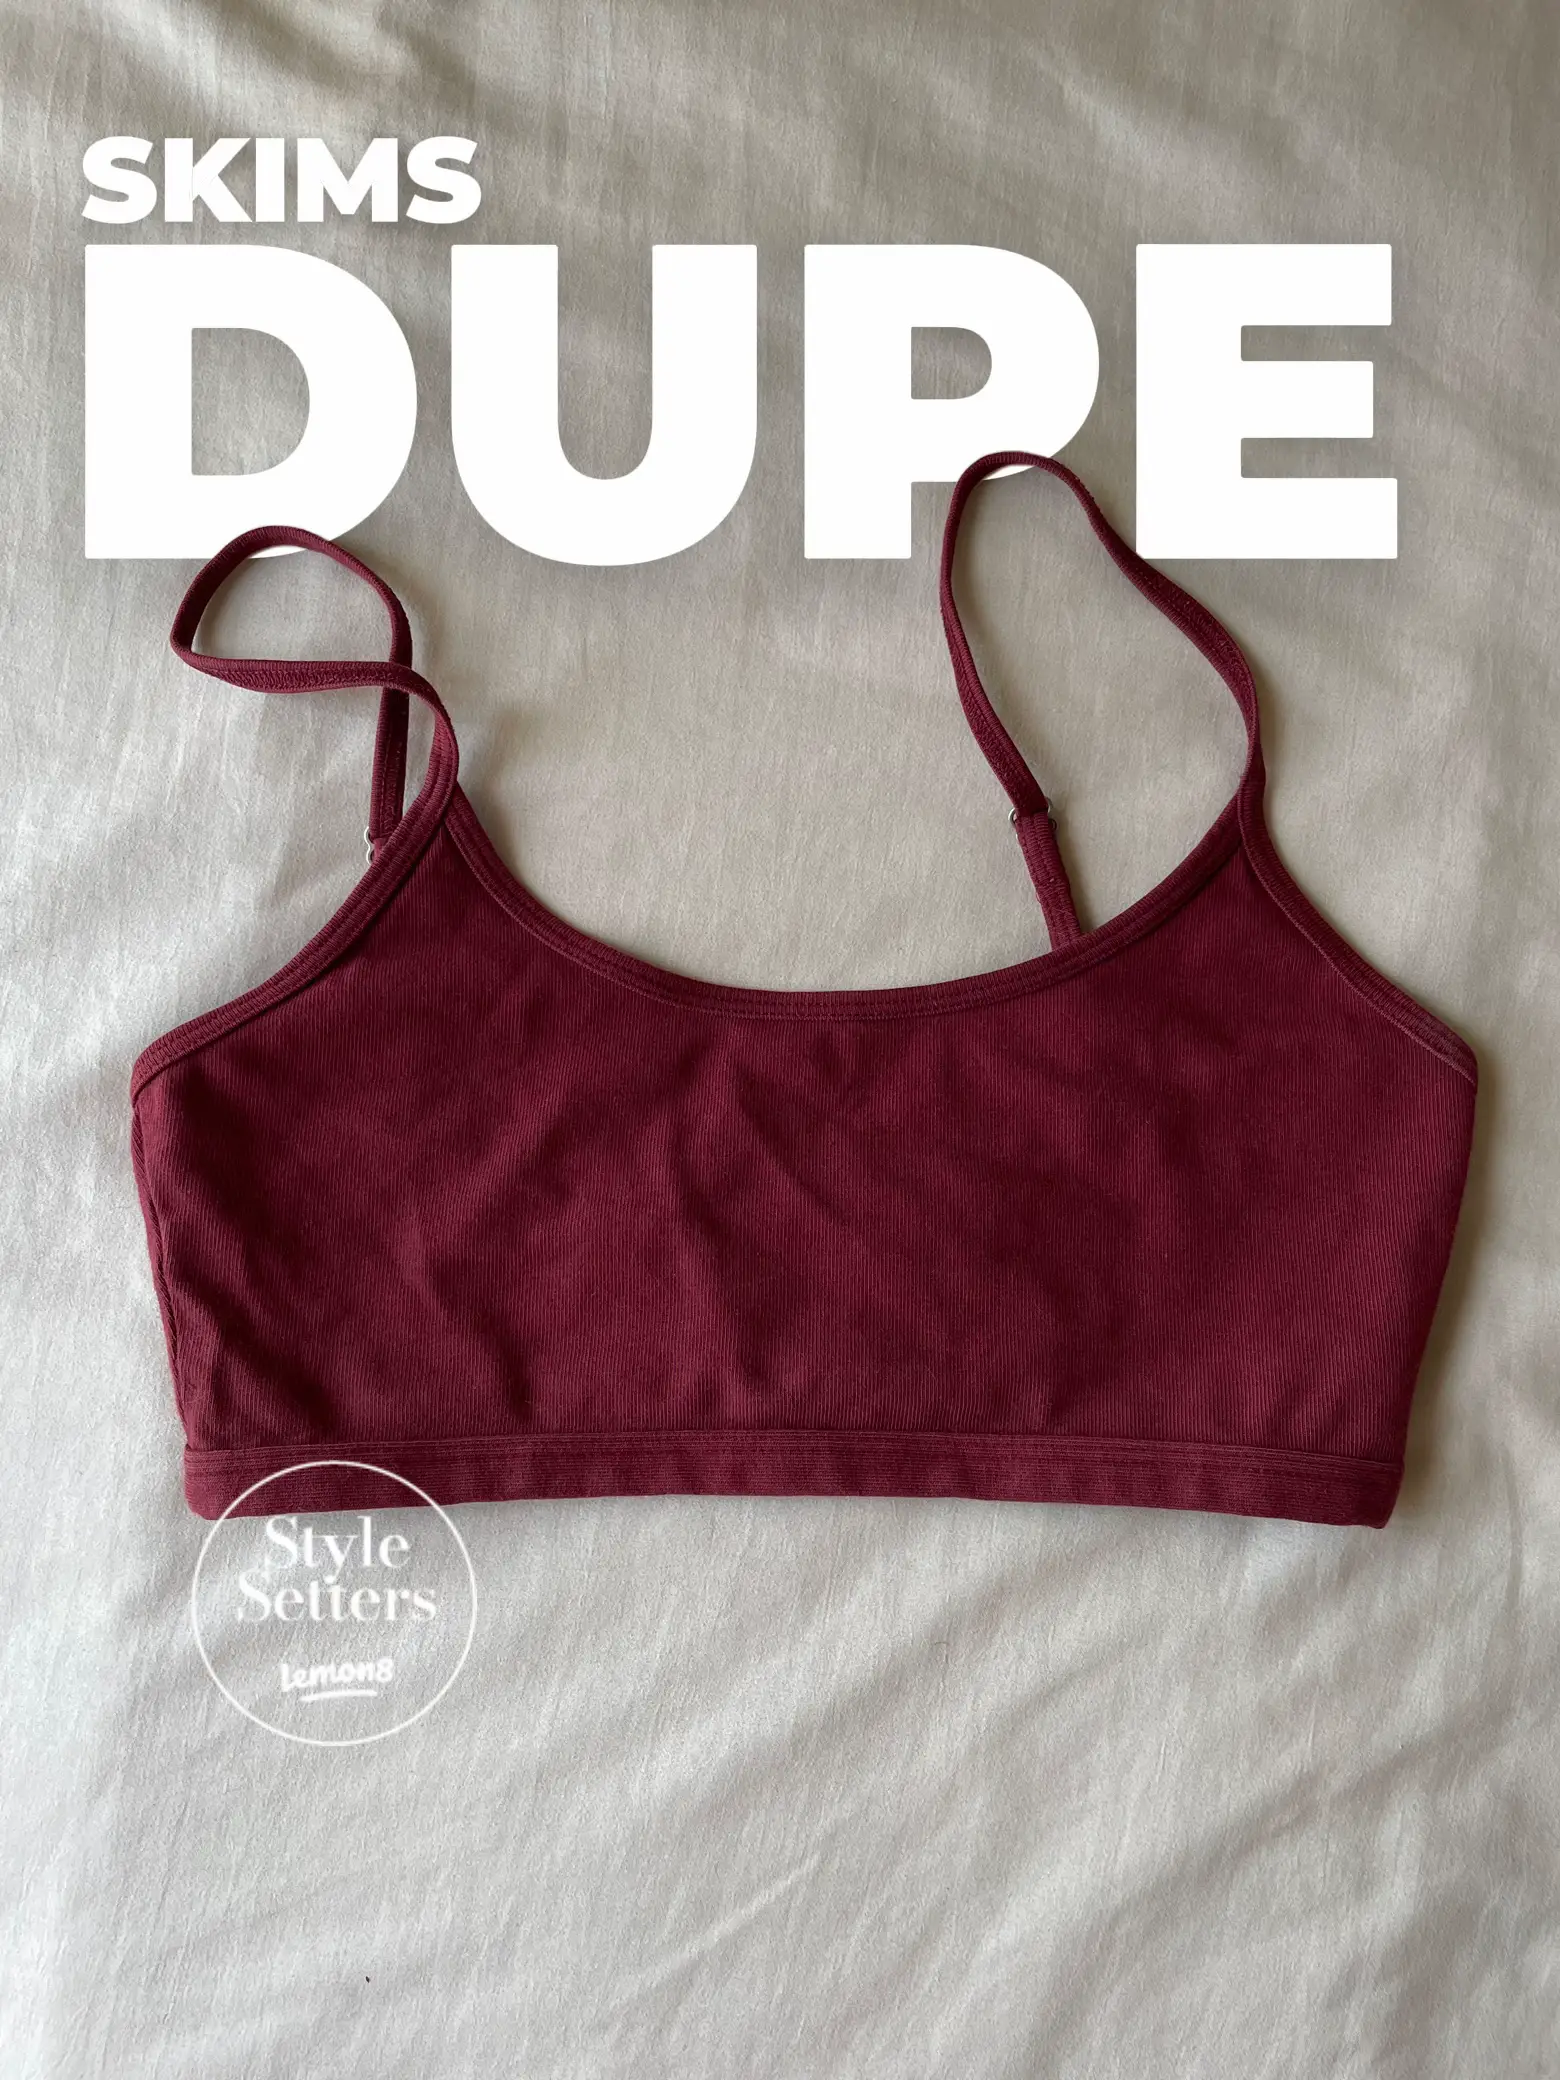 SKIMS BRA TOP DUPE, Gallery posted by kimberlyfleming